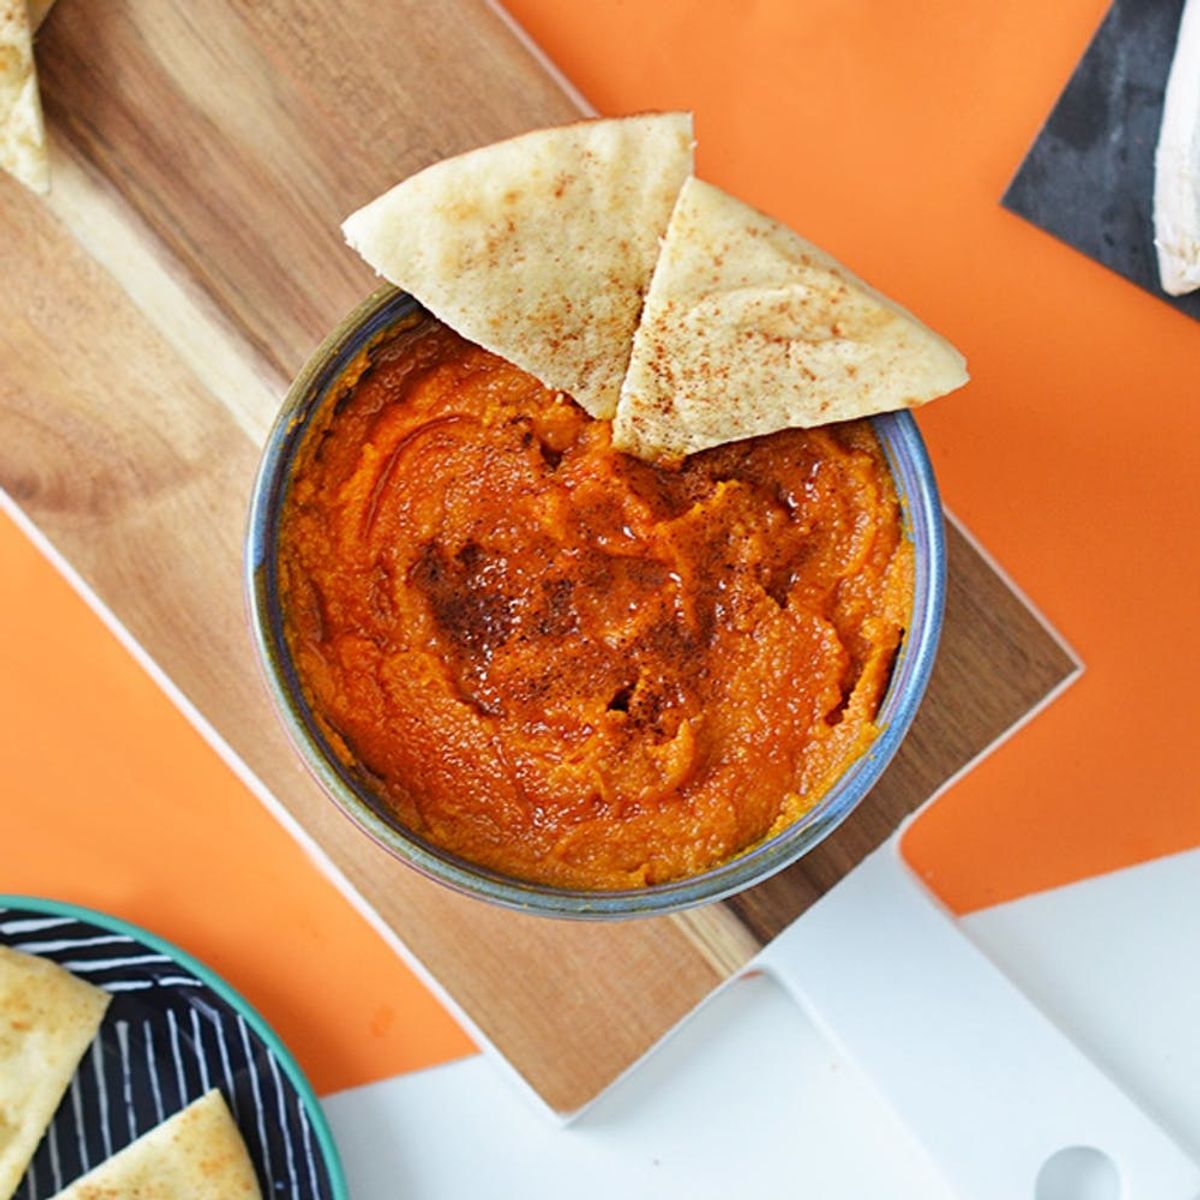 This Pumpkin Hummus Recipe Is Going to Give Your Turkey a Run for Its Money